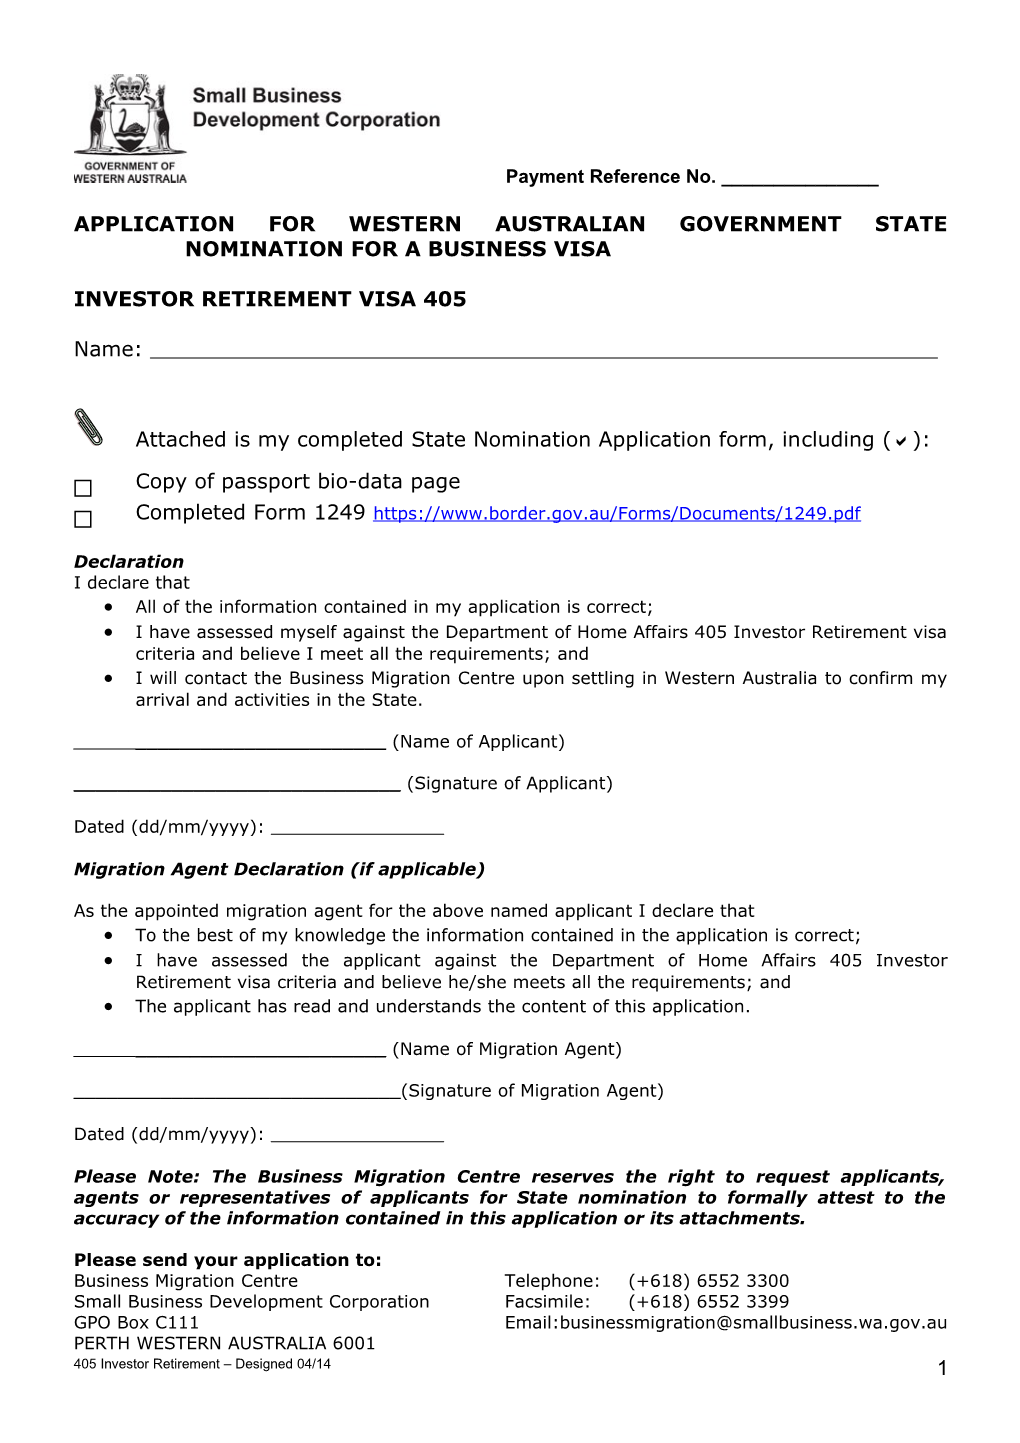 Application for Western Australian Government State Nomination for a Business Visa